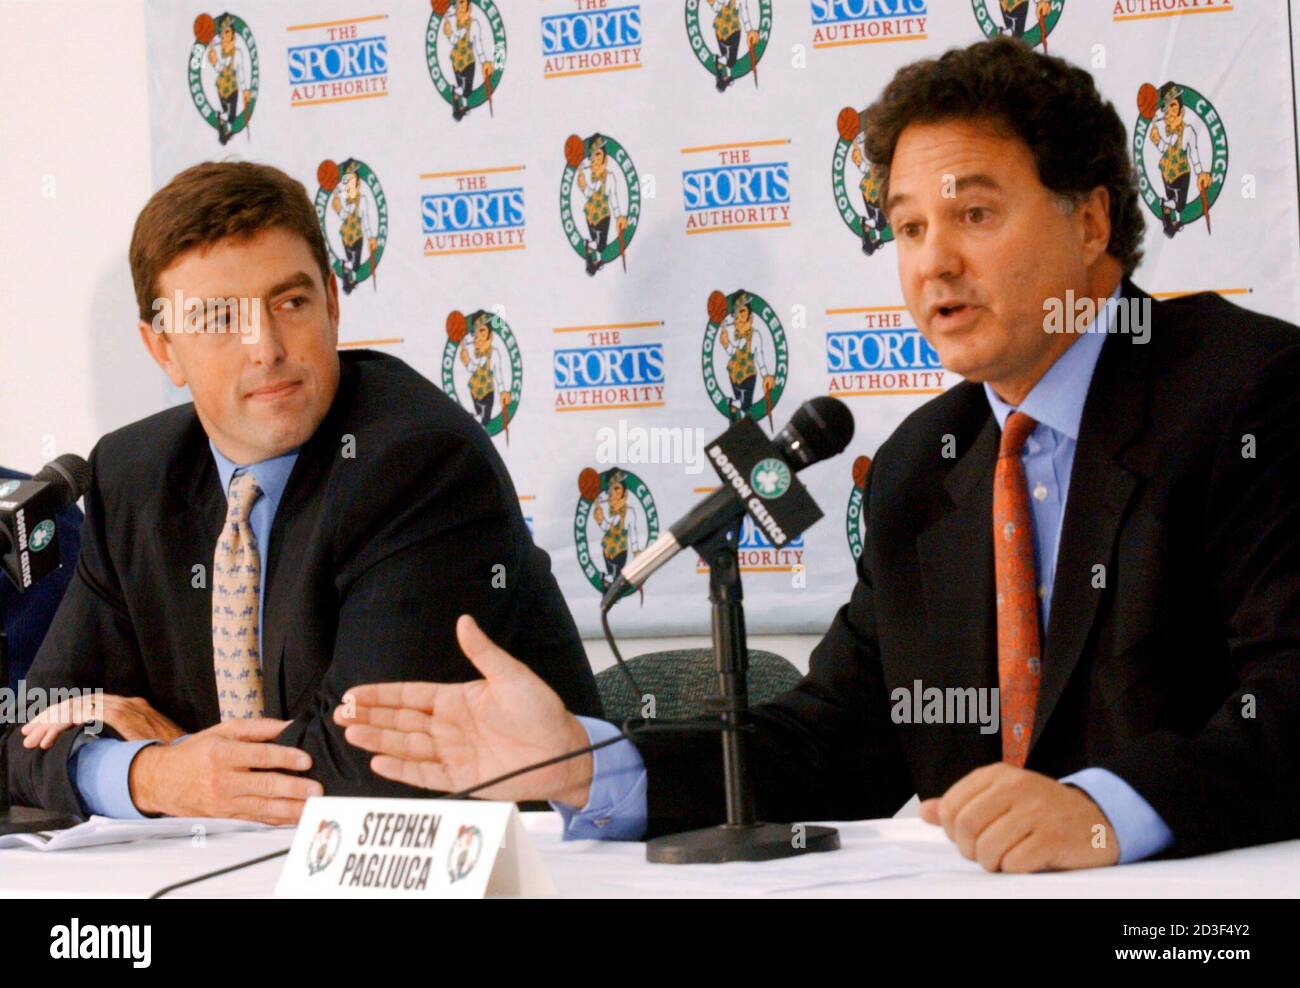 Representatives of the private investment group Boston Basketball Partners,  Wycliffe Grousbeck (L), a general partner at Highland Capital Partners, and  Stephen Pagliuca (R), a managing director at Bain Capital, announce to  reporters